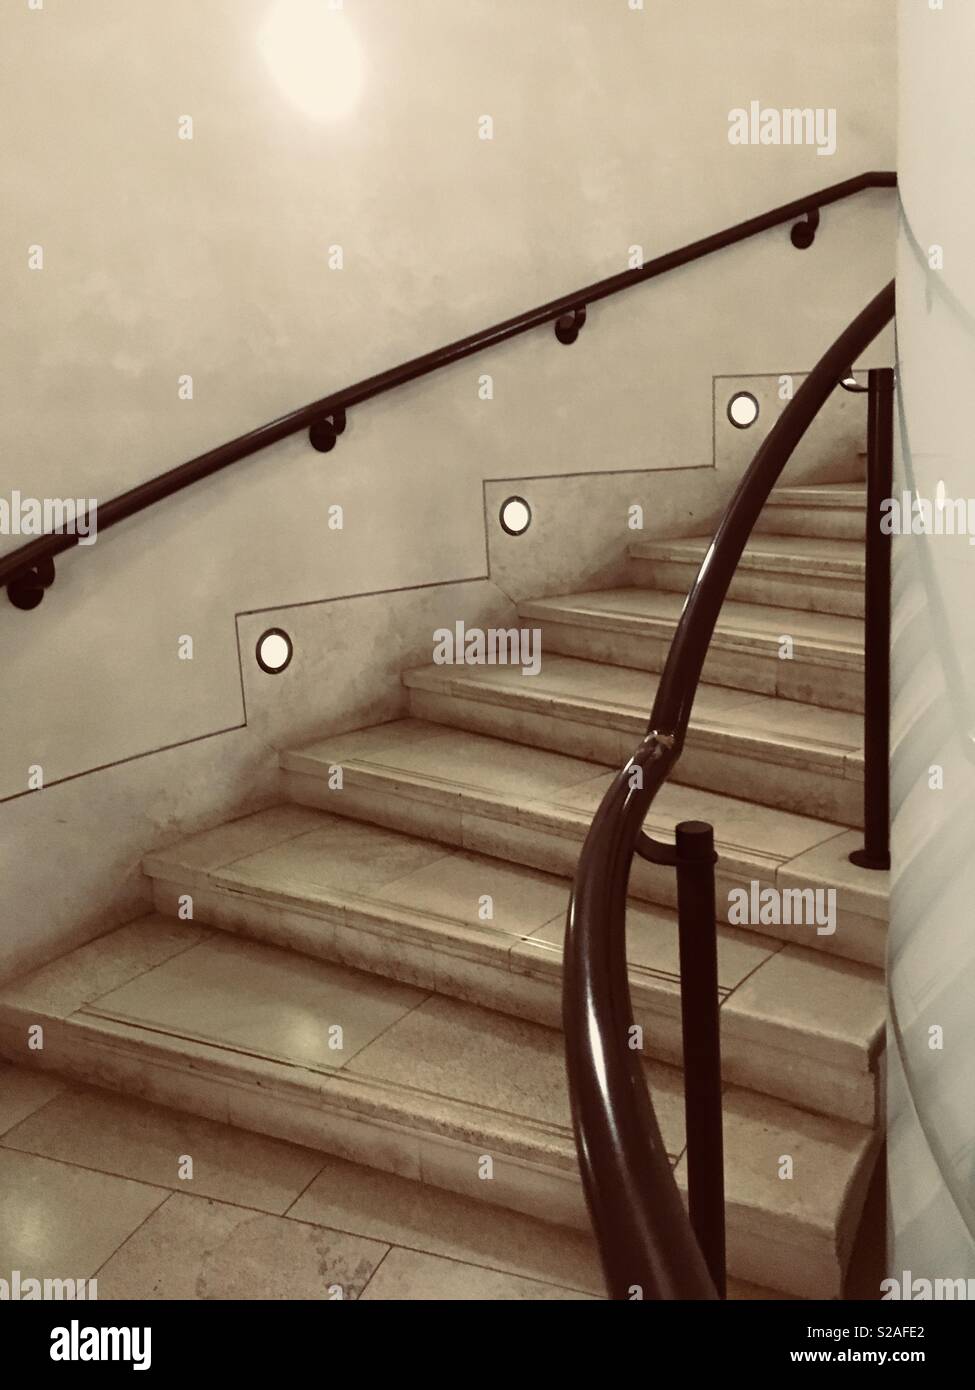 Curved staircase leading up Stock Photo